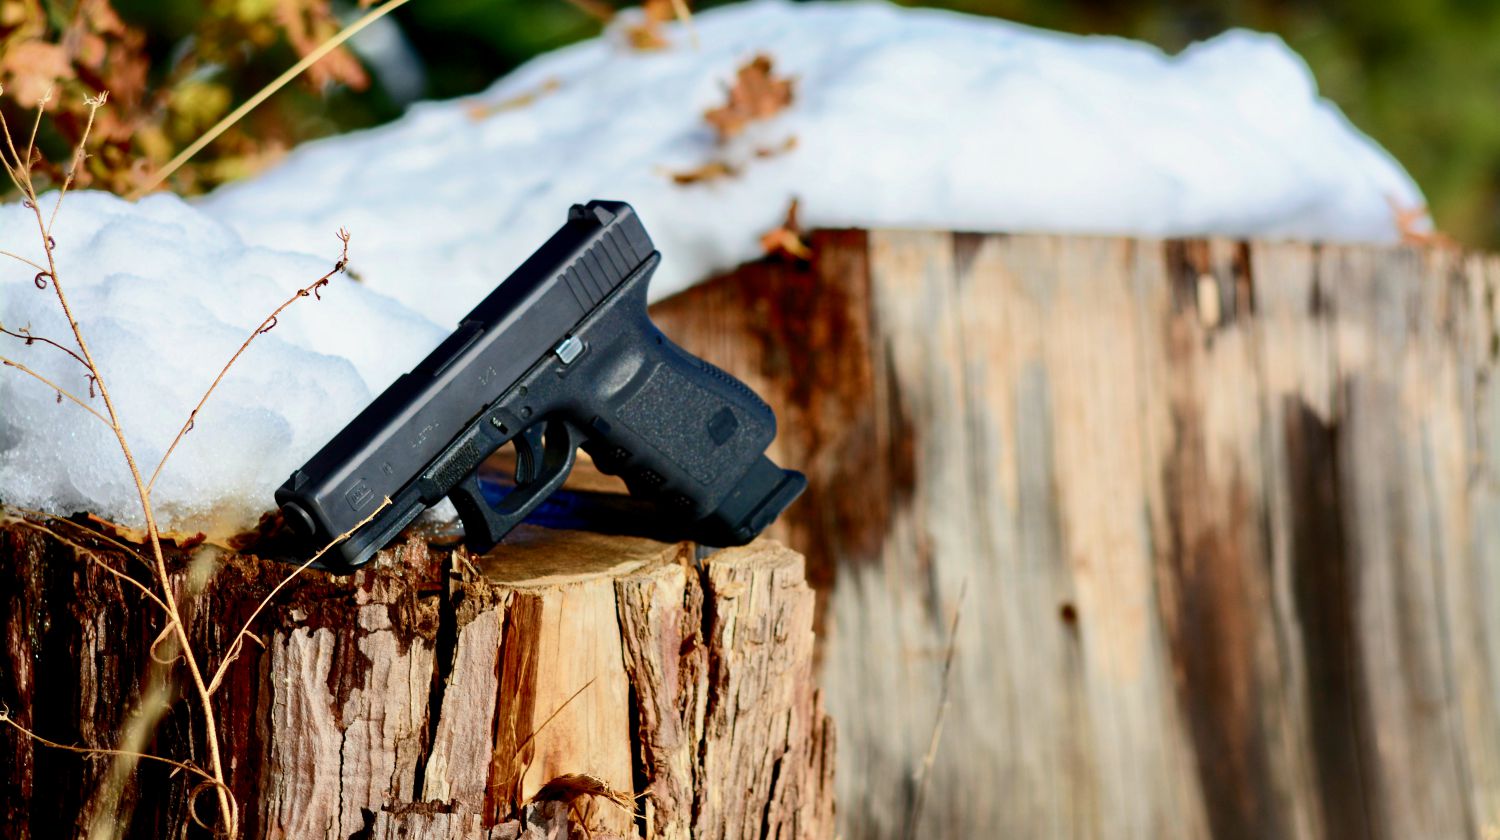 Glock 19 product shot outdoor autumn snow | Glock 19 For Concealed Carry Review | Featured